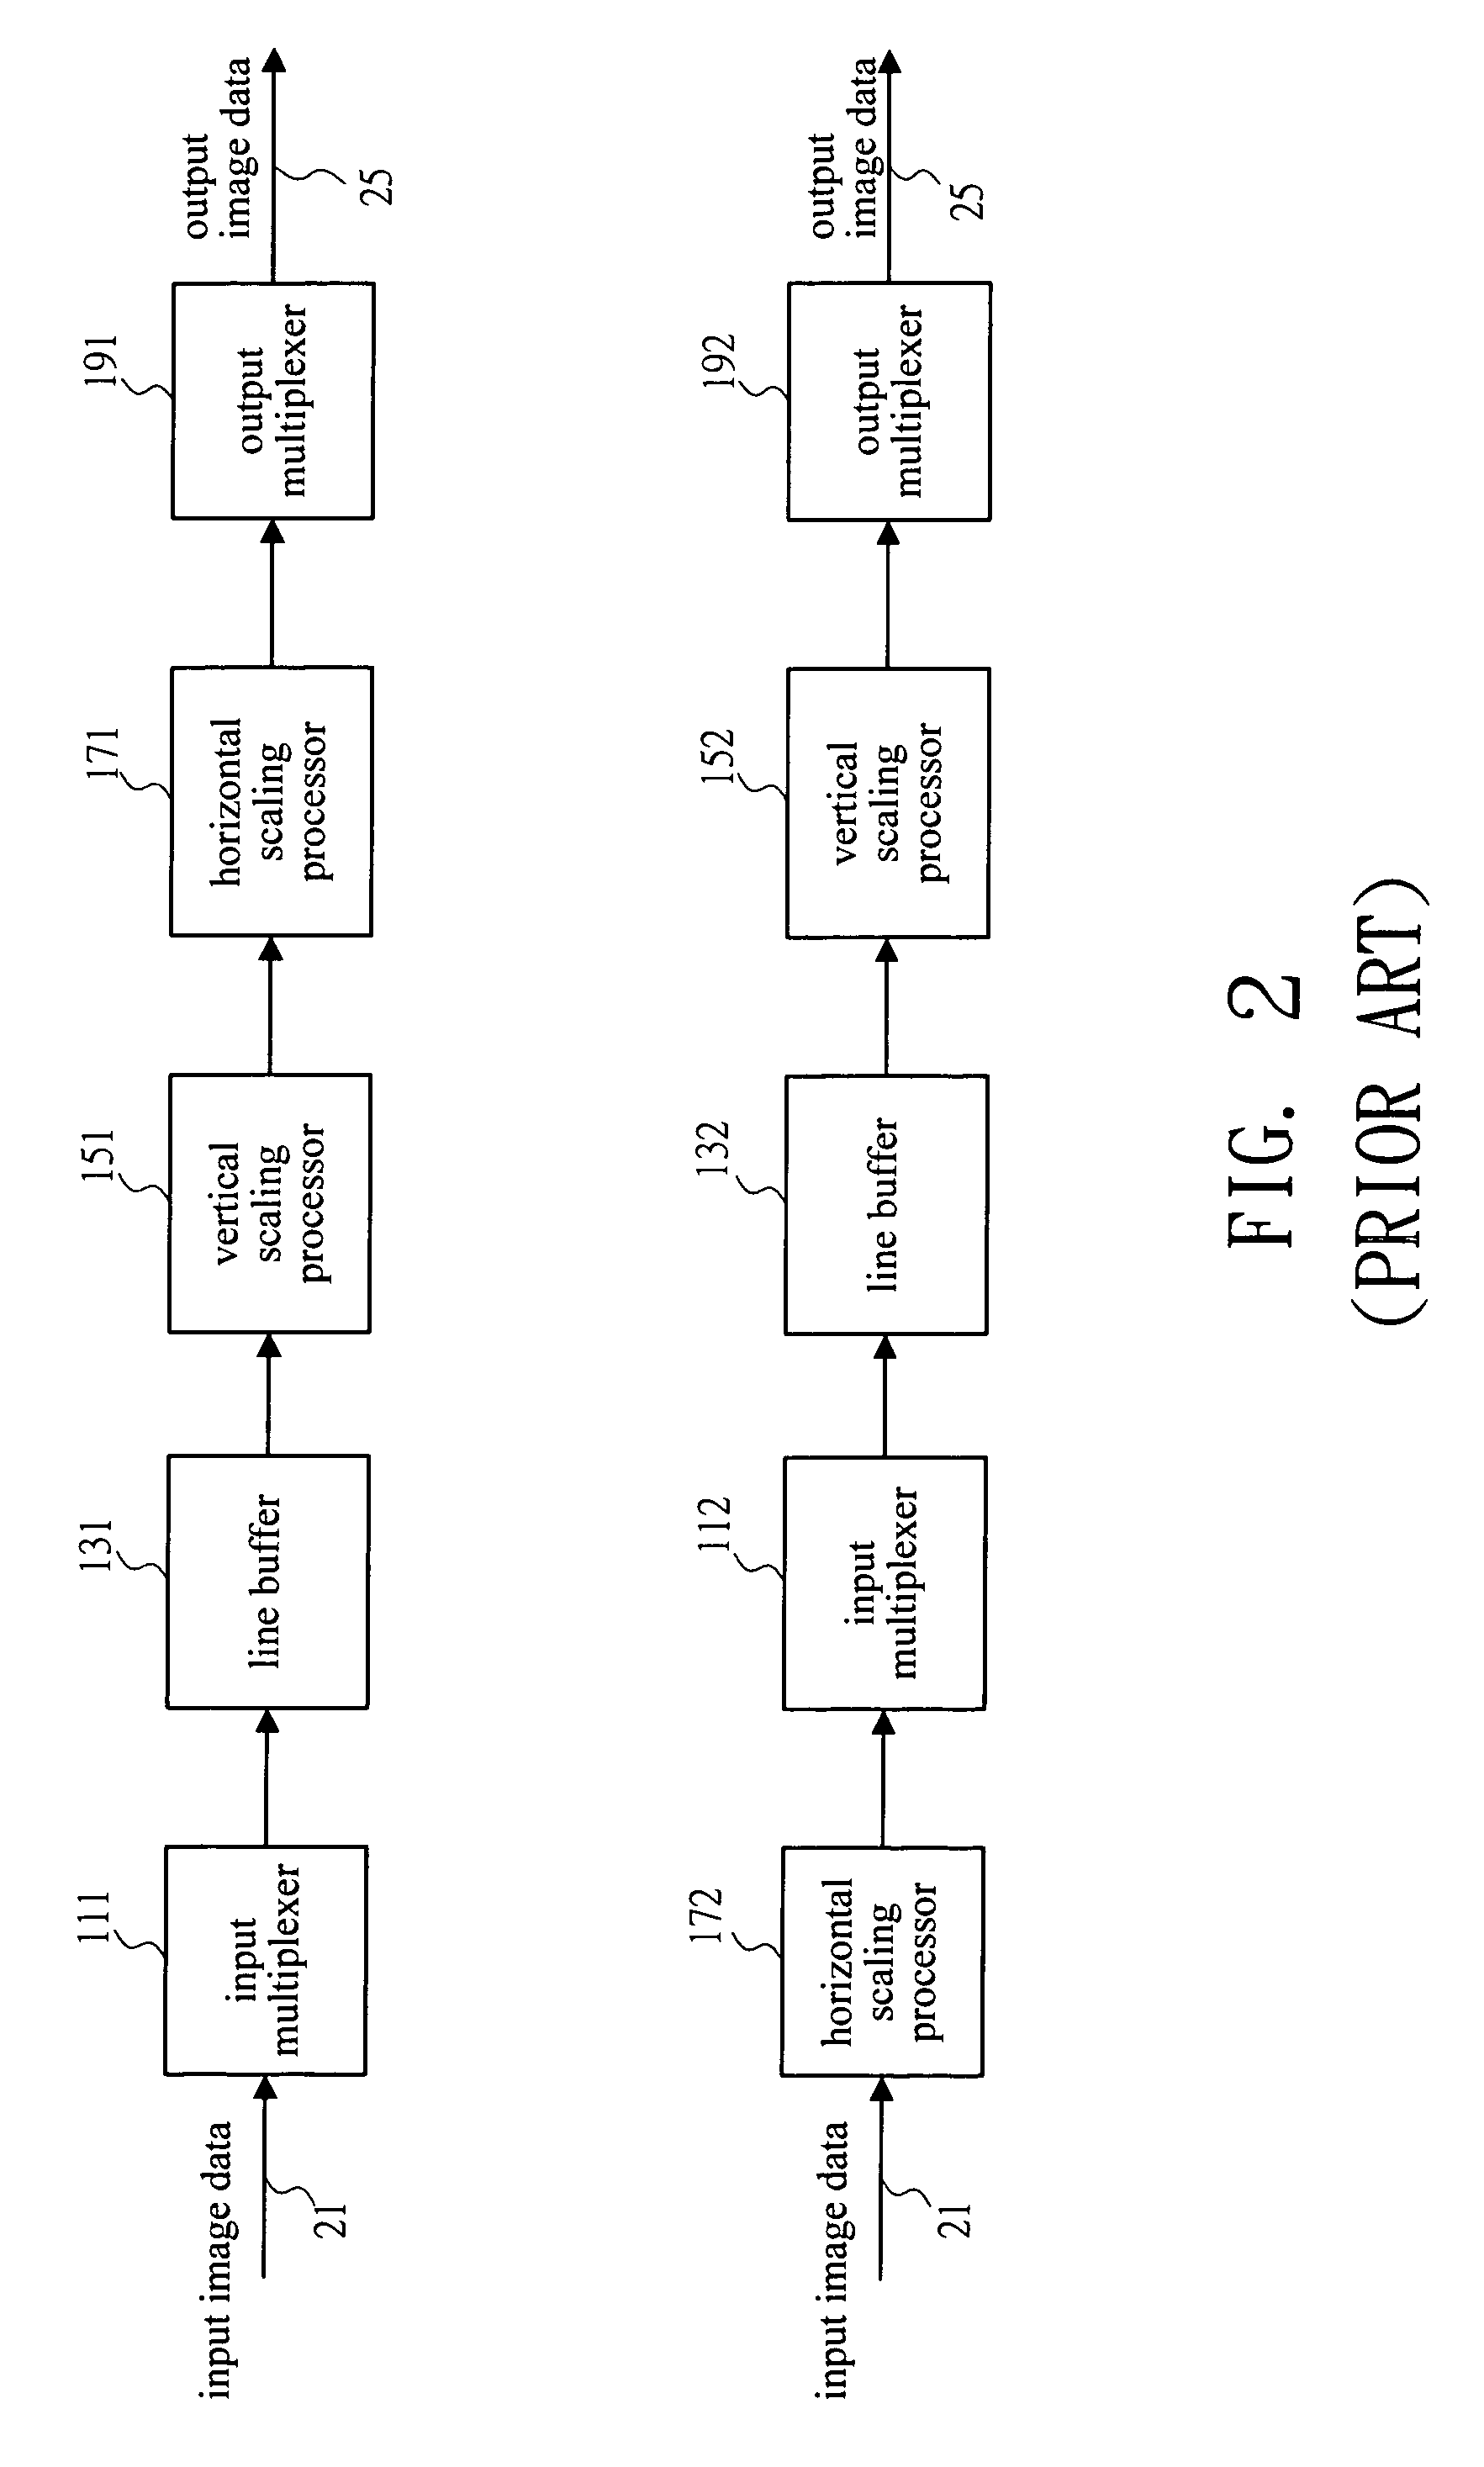 Scaling device of image process